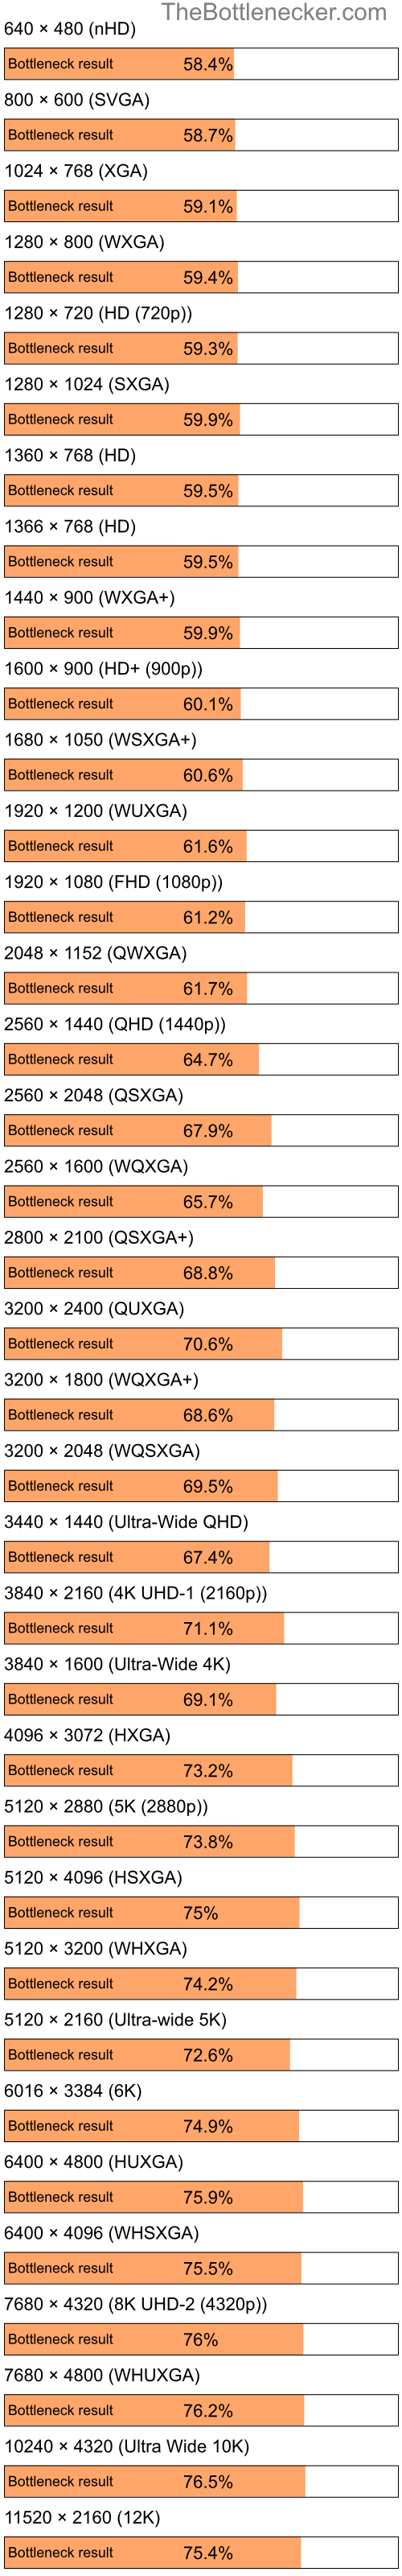 Bottleneck results by resolution for Intel Atom N280 and NVIDIA Quadro FX 370 in Processor Intense Tasks